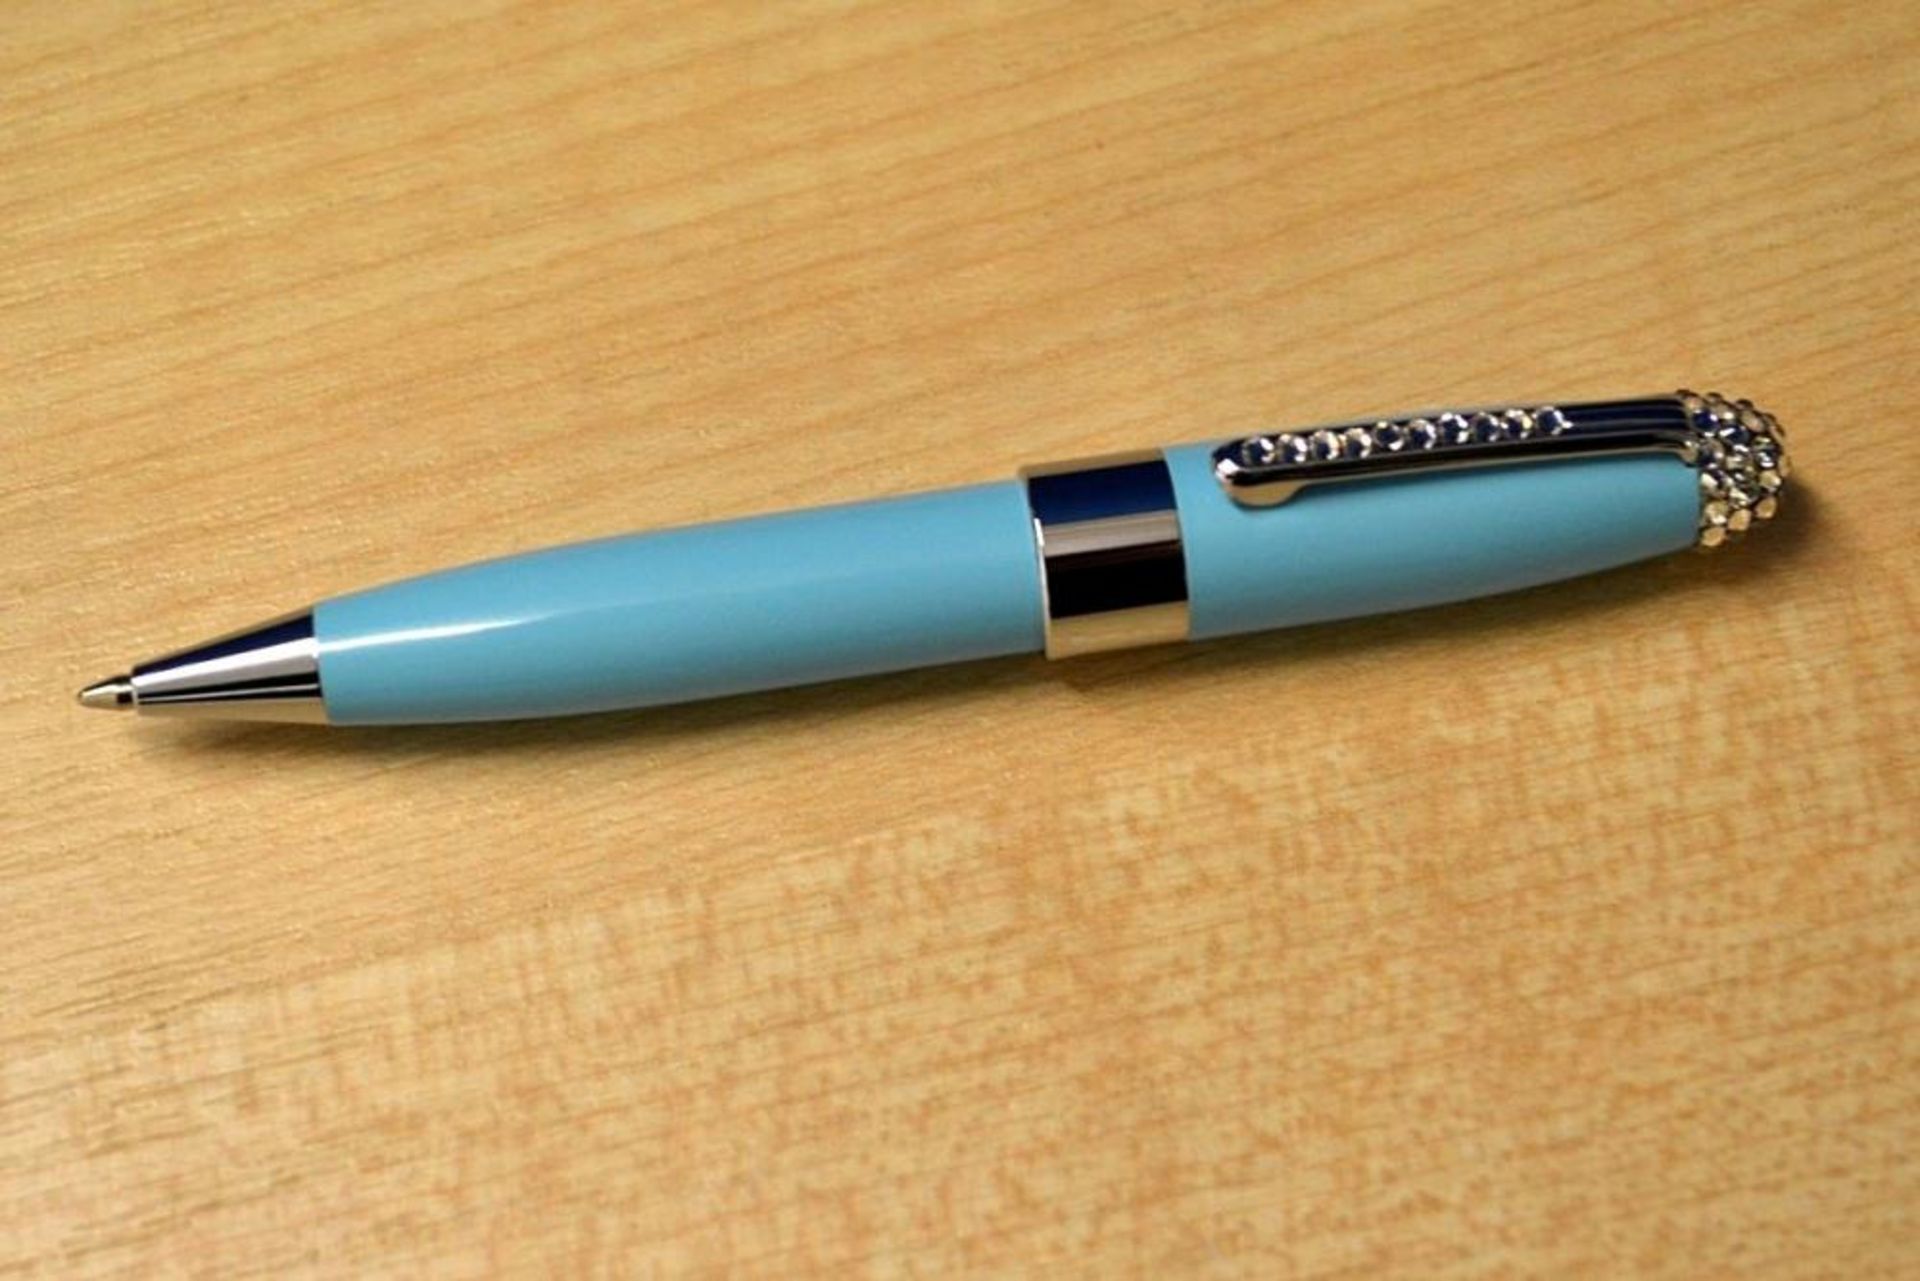 1 x ICE LONDON "Duchess" Ladies Pen Embellished With SWAROVSKI Crystals - Colour: Light Blue - Brand - Image 2 of 3